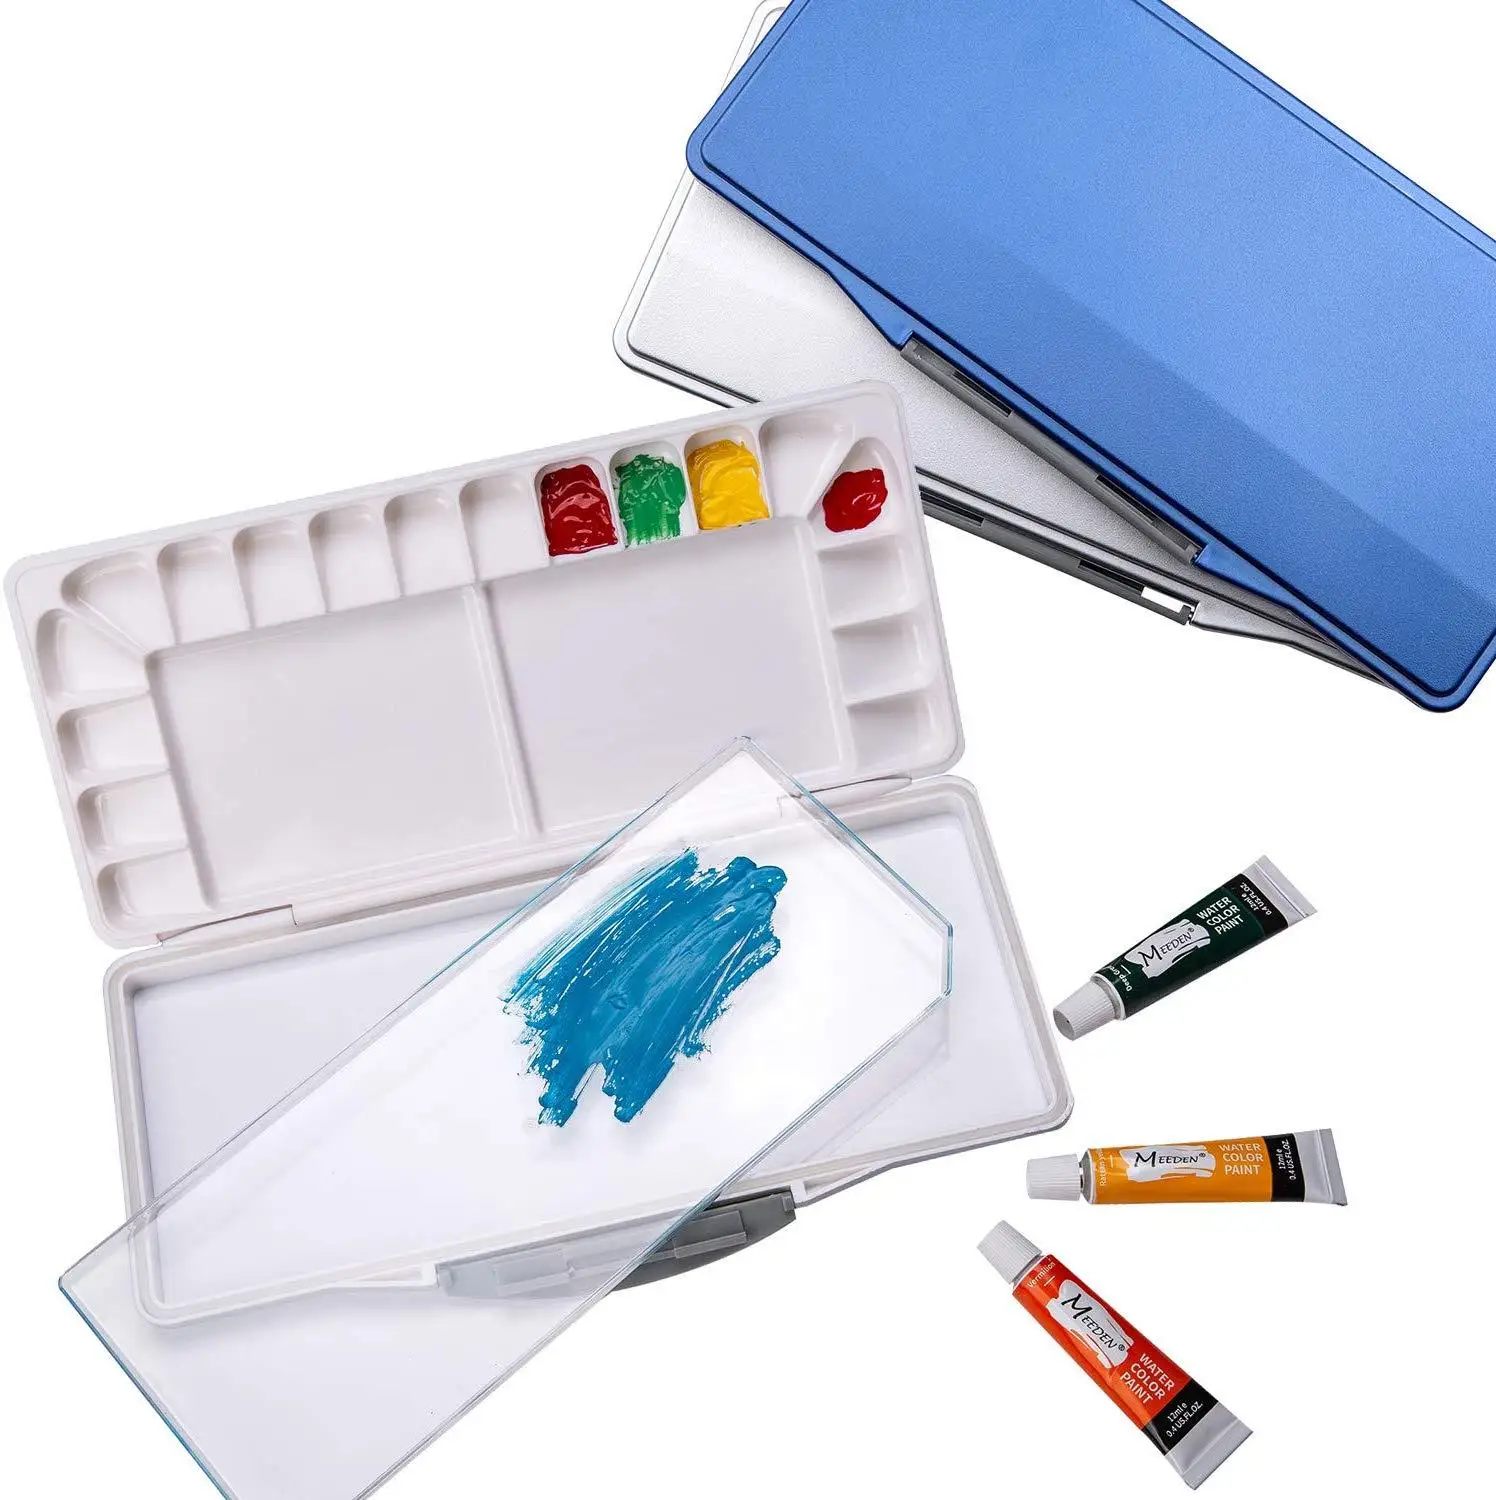 MEEDEN Airtight Leak-Proof Watercolor Palette Gouache & Acrylic Paint Peel-Off Palette Foldable Travel Paint Palette Box with 18-Well & 3 Mixing Areas for Watercolor Silver Case 